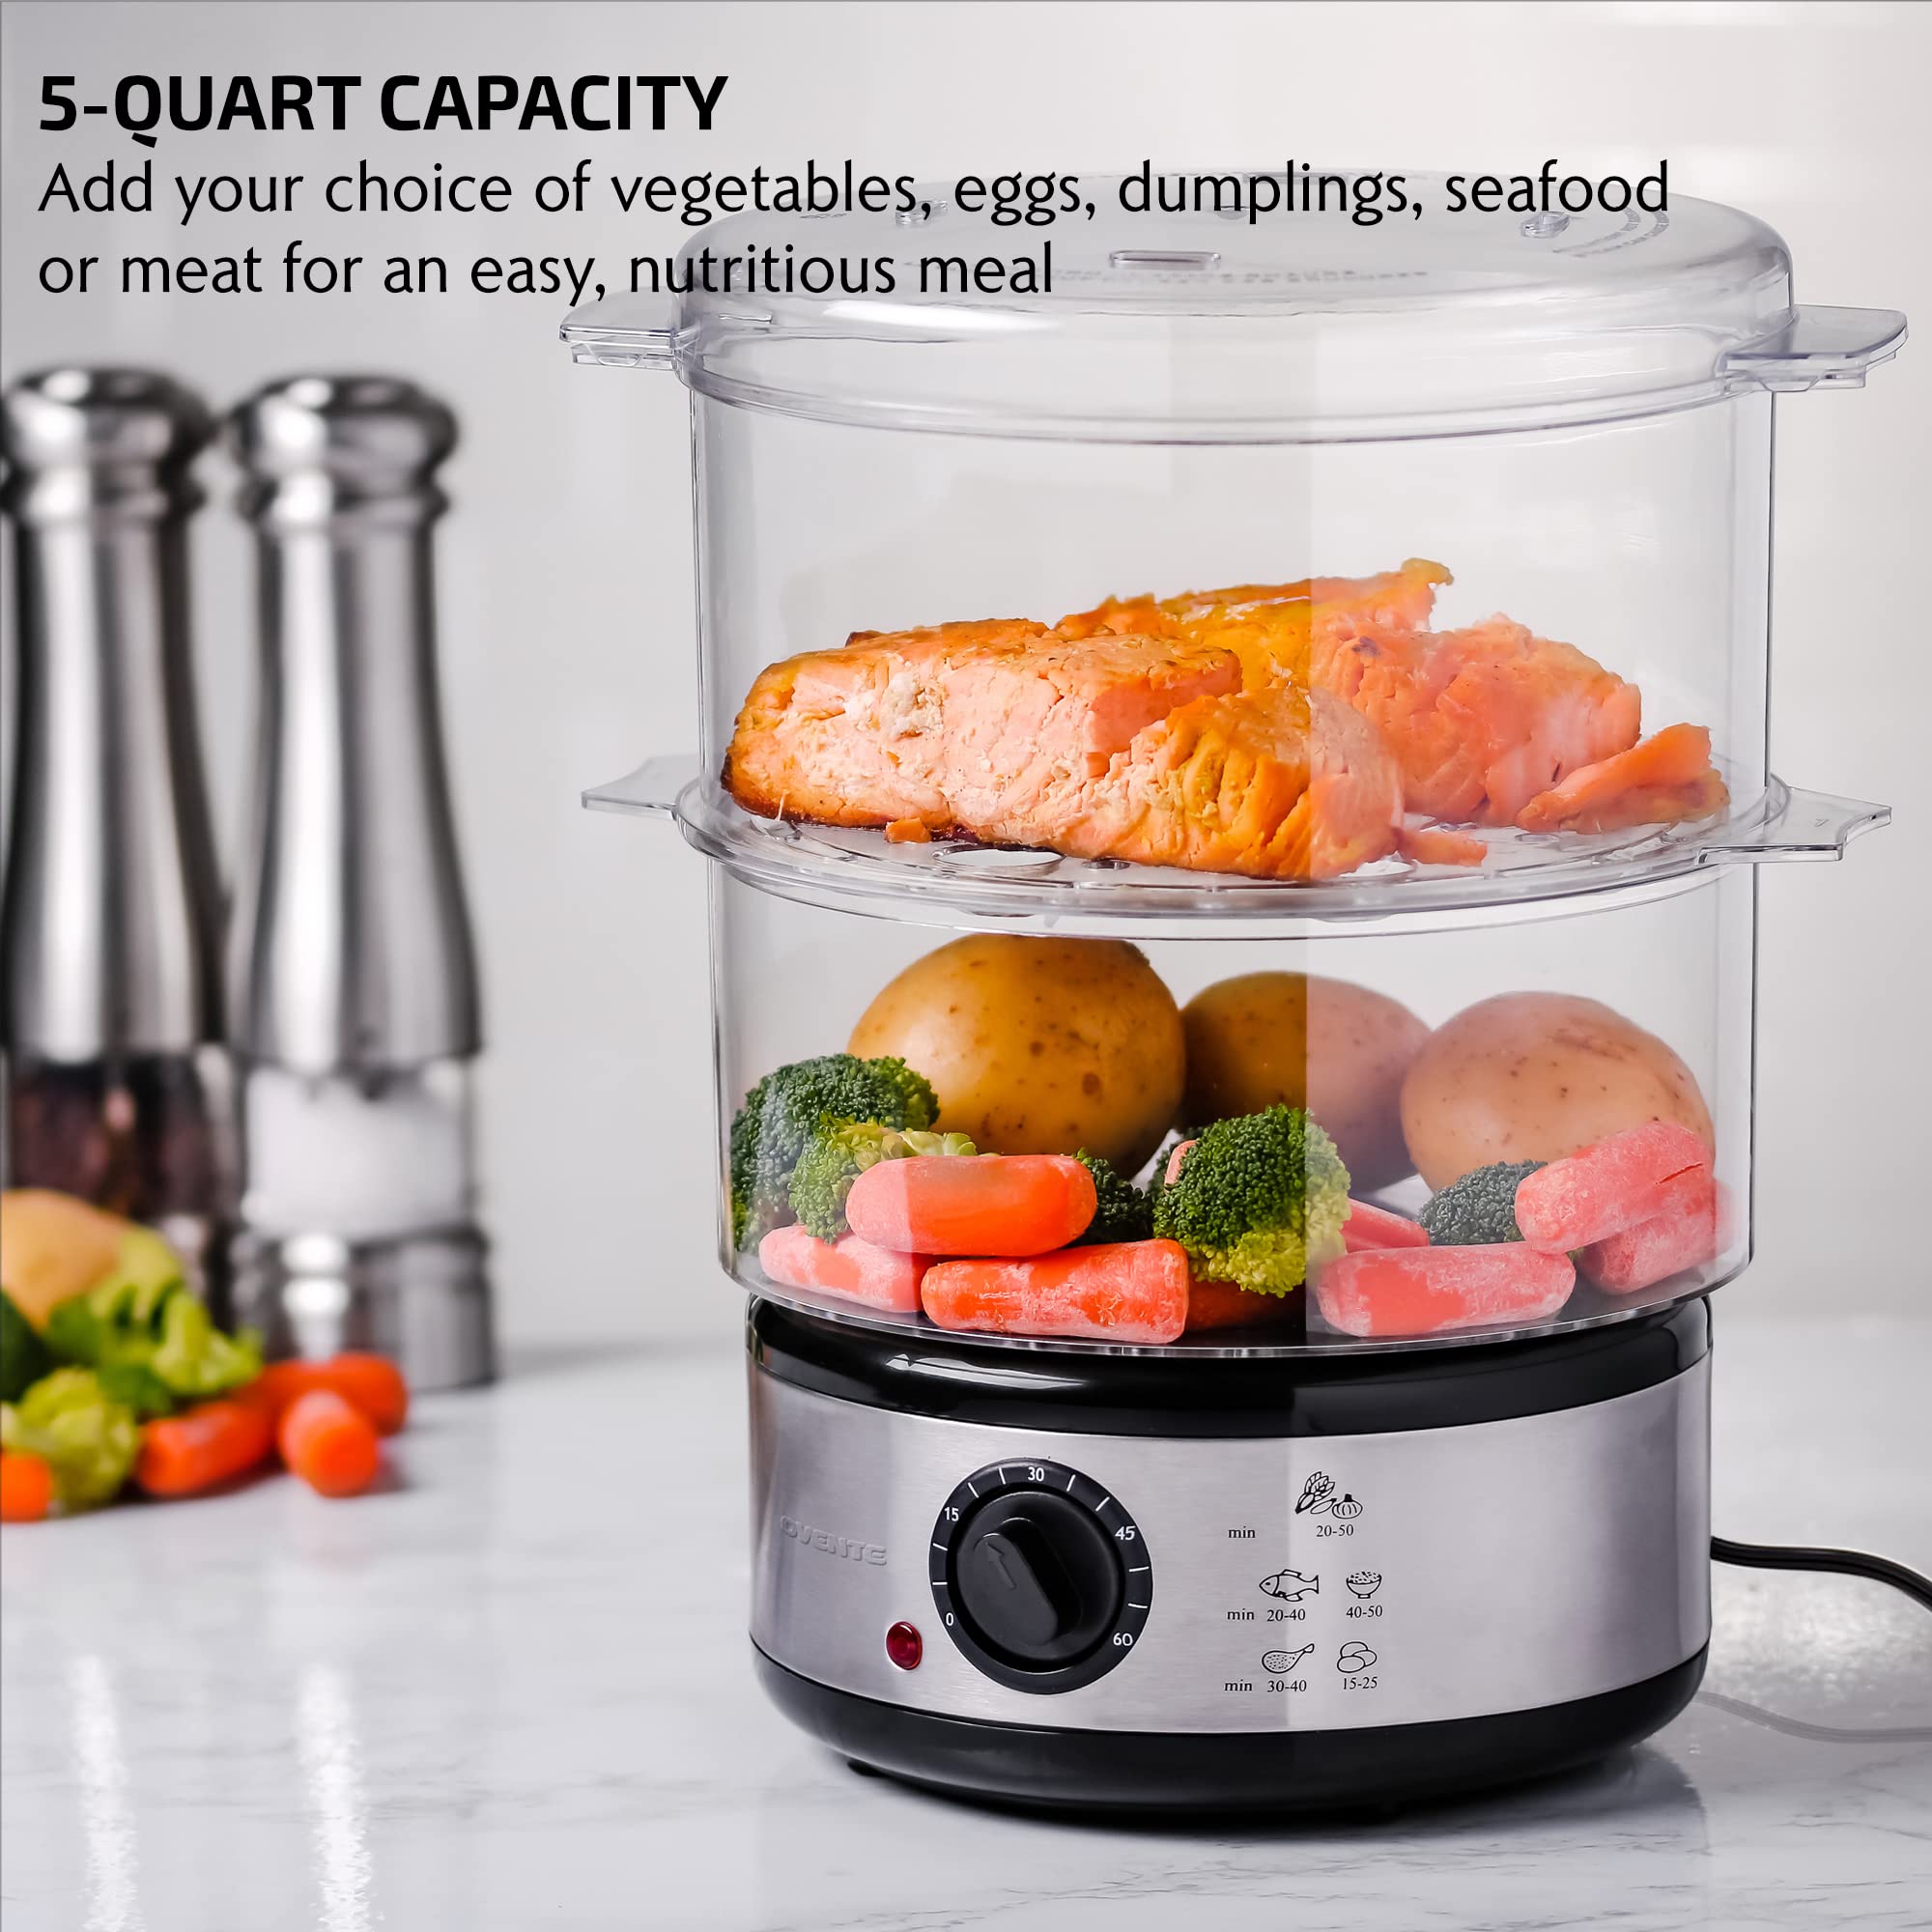 OVENTE 2 Tier Electric Food Steamer for Cooking Vegetables, Stainless Steel Base, BPA-Free Stackable Baskets & Dishwasher Safe, 400W with Auto Shutoff & 60-Minute Timer, 5 Quart Capacity, Silver FS62S